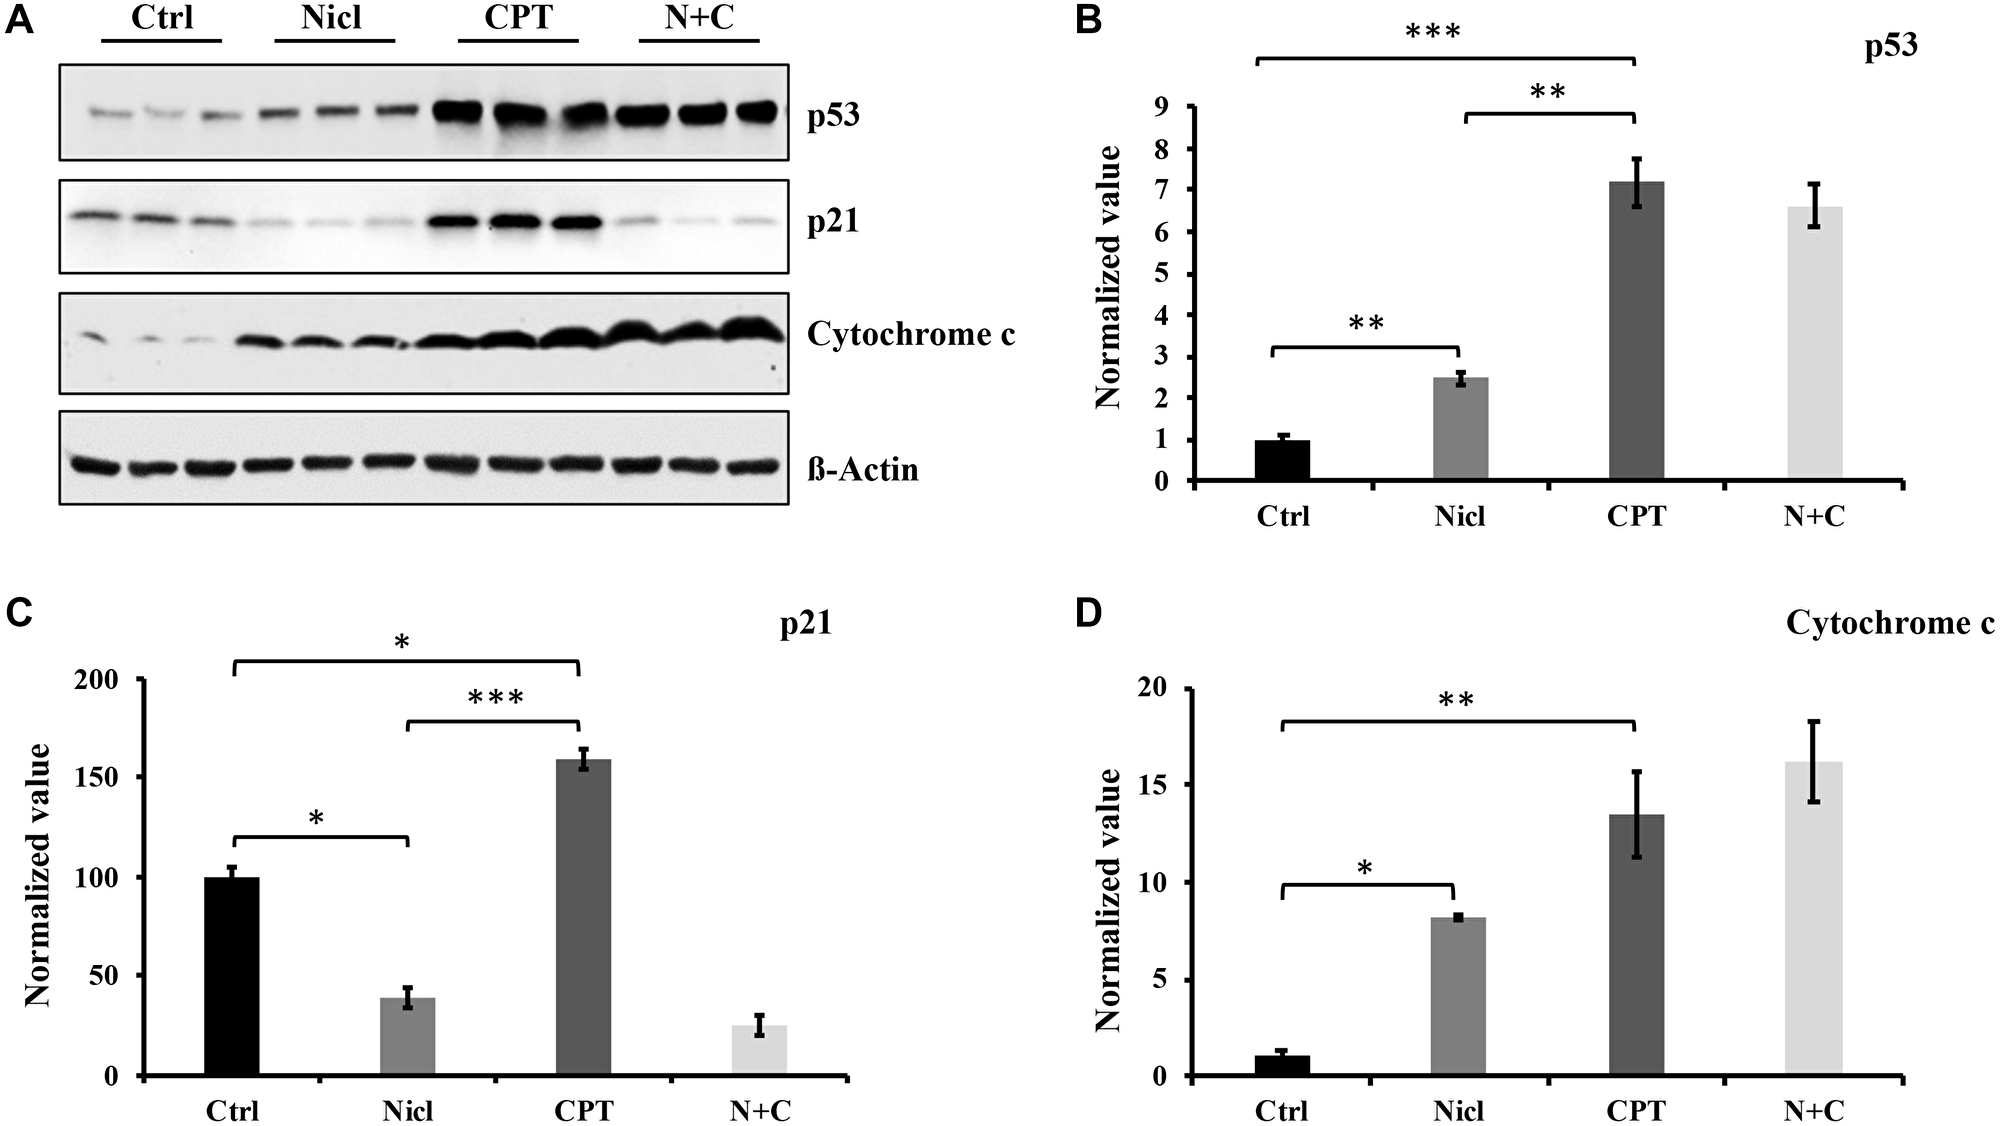 Niclosamide enhances p53 protein and cytochrome c expression but suppresses p21 expression.